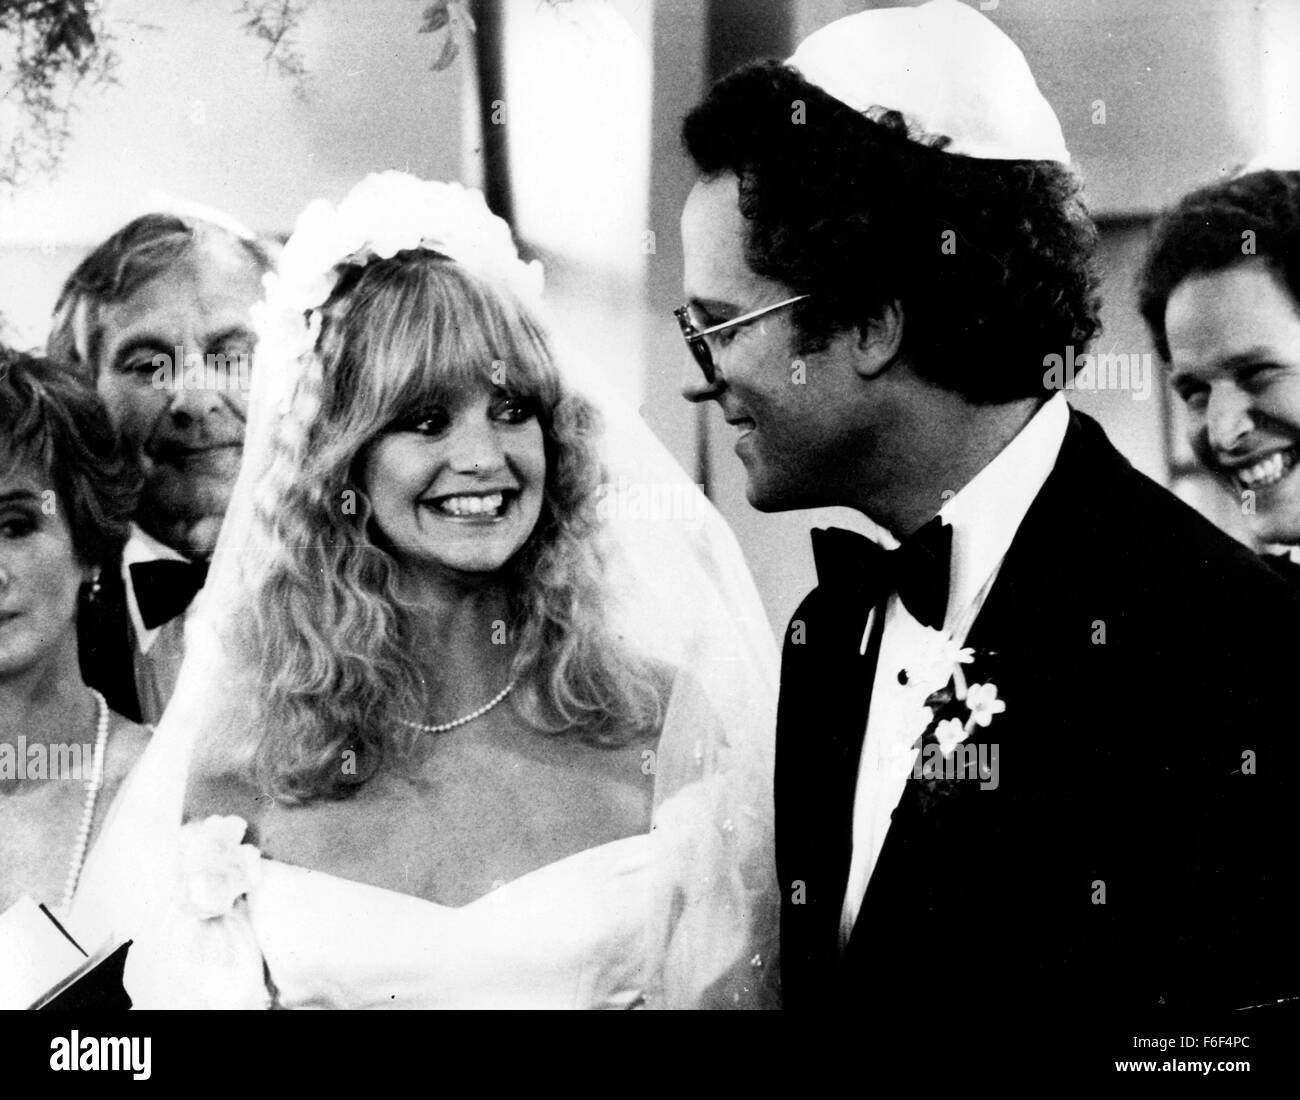 May 18, 1980 - Hollywood, CA, U.S. - Blonde, radiant, vivacious GOLDIE HAWN, is seen being married to ALBERT BROOKS, the man of her dreams. But. alas, her bliss is to end only ours later. Her new husband dies on their wedding night. The tragic plot is the surprise start to Goldie's latest film. The picture described as a sophisticated social comedy is called 'Private Benjamin'. (Credit Image: Ac KEYSTONE Pictures USA) Stock Photo